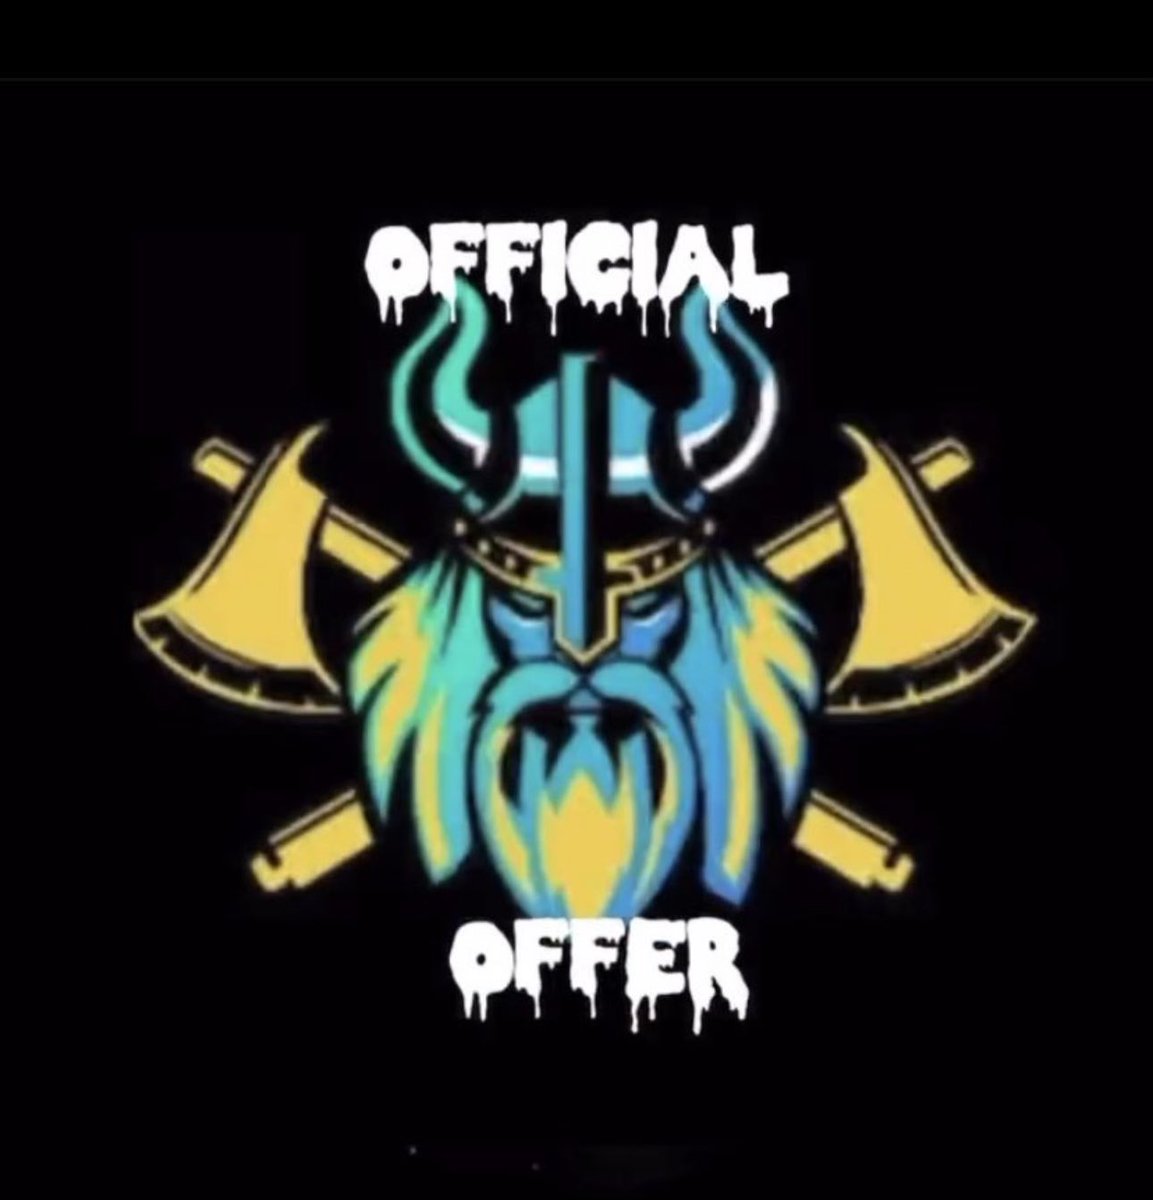 After a great conversation with @Coach_Drayton I am blessed to receive my 2nd offer from @HVille_Vikings @RecruitGeorgia @PrepRedzoneGA @CoachWagBI @GTRfootball @Rivals @On3Recruits @247fbrecruiting @CoachKingBI @Coach_Oxendine @shonb82 @Bradwell_FB